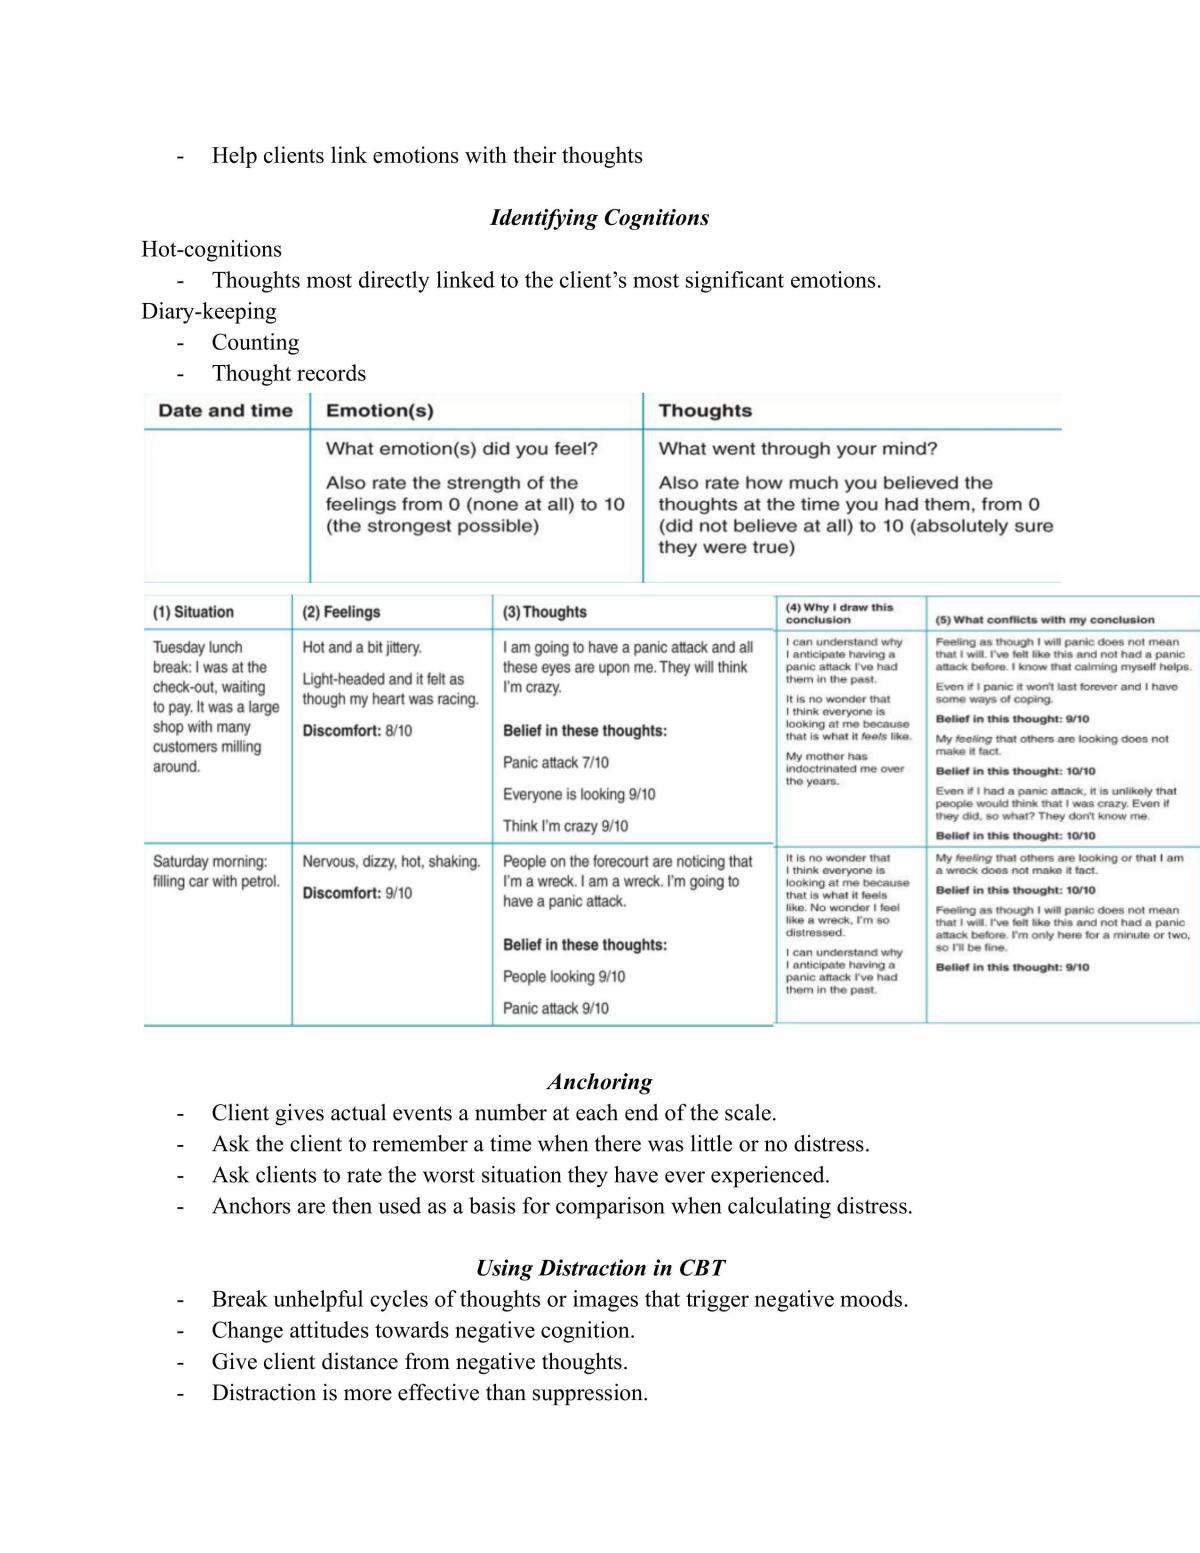 COU200 Cognitive Behavioural Therapy: Skills and Applications Complete Course Notes - Page 25